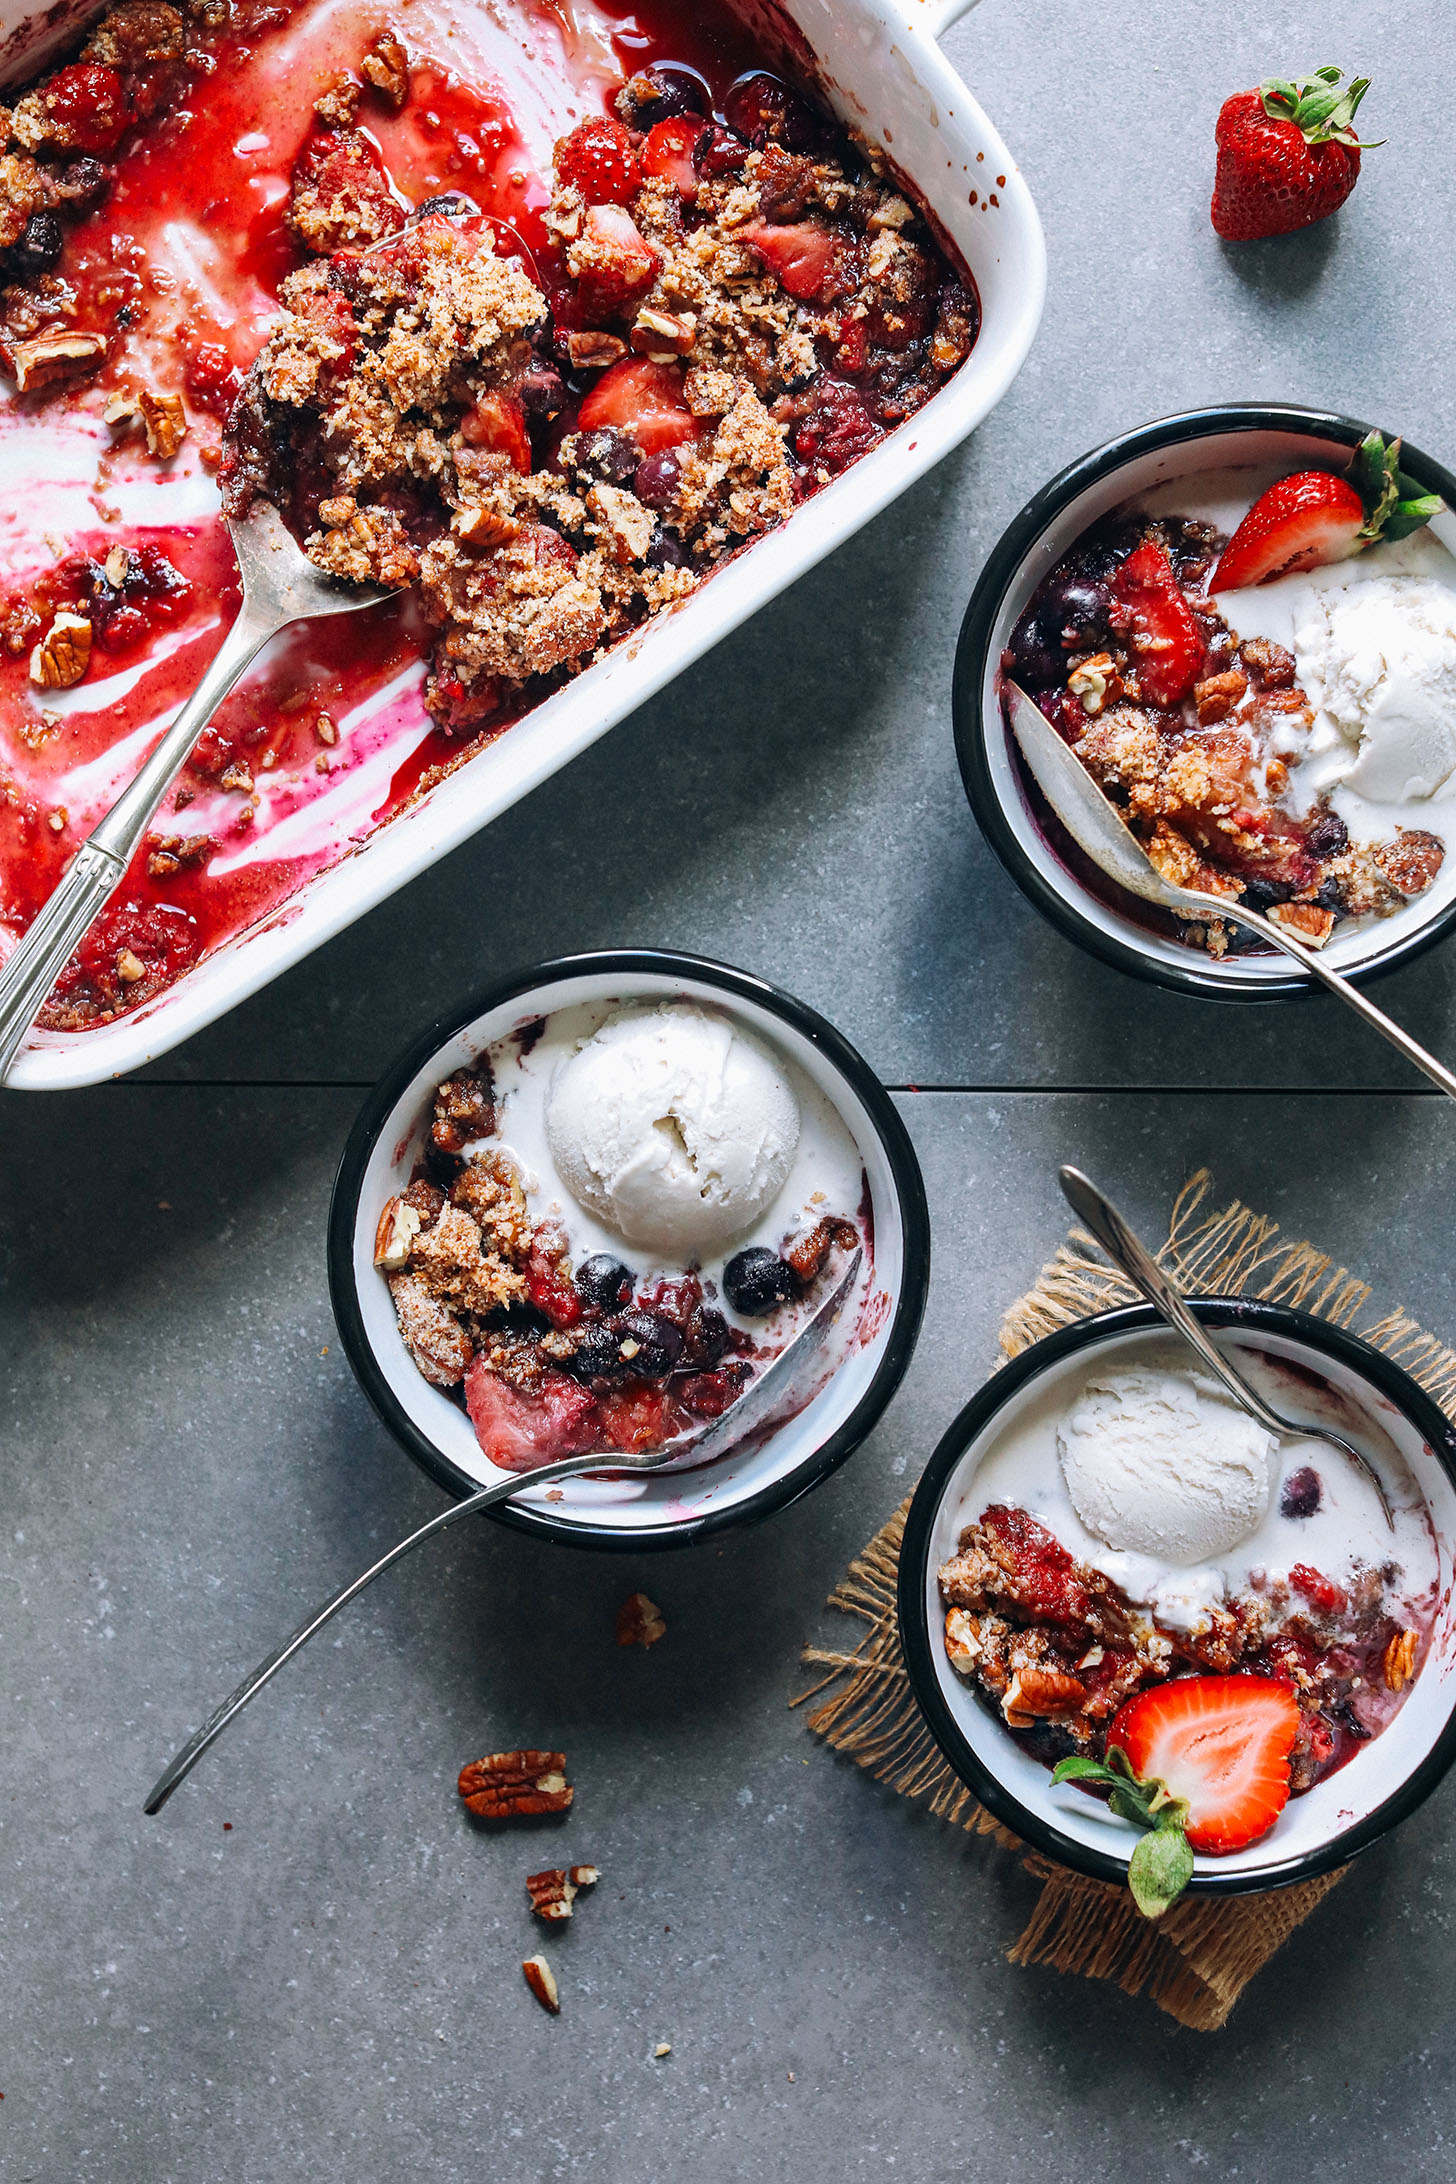 Bowls of Grain-Free Berry Crisp for a delicious plant-based dessert